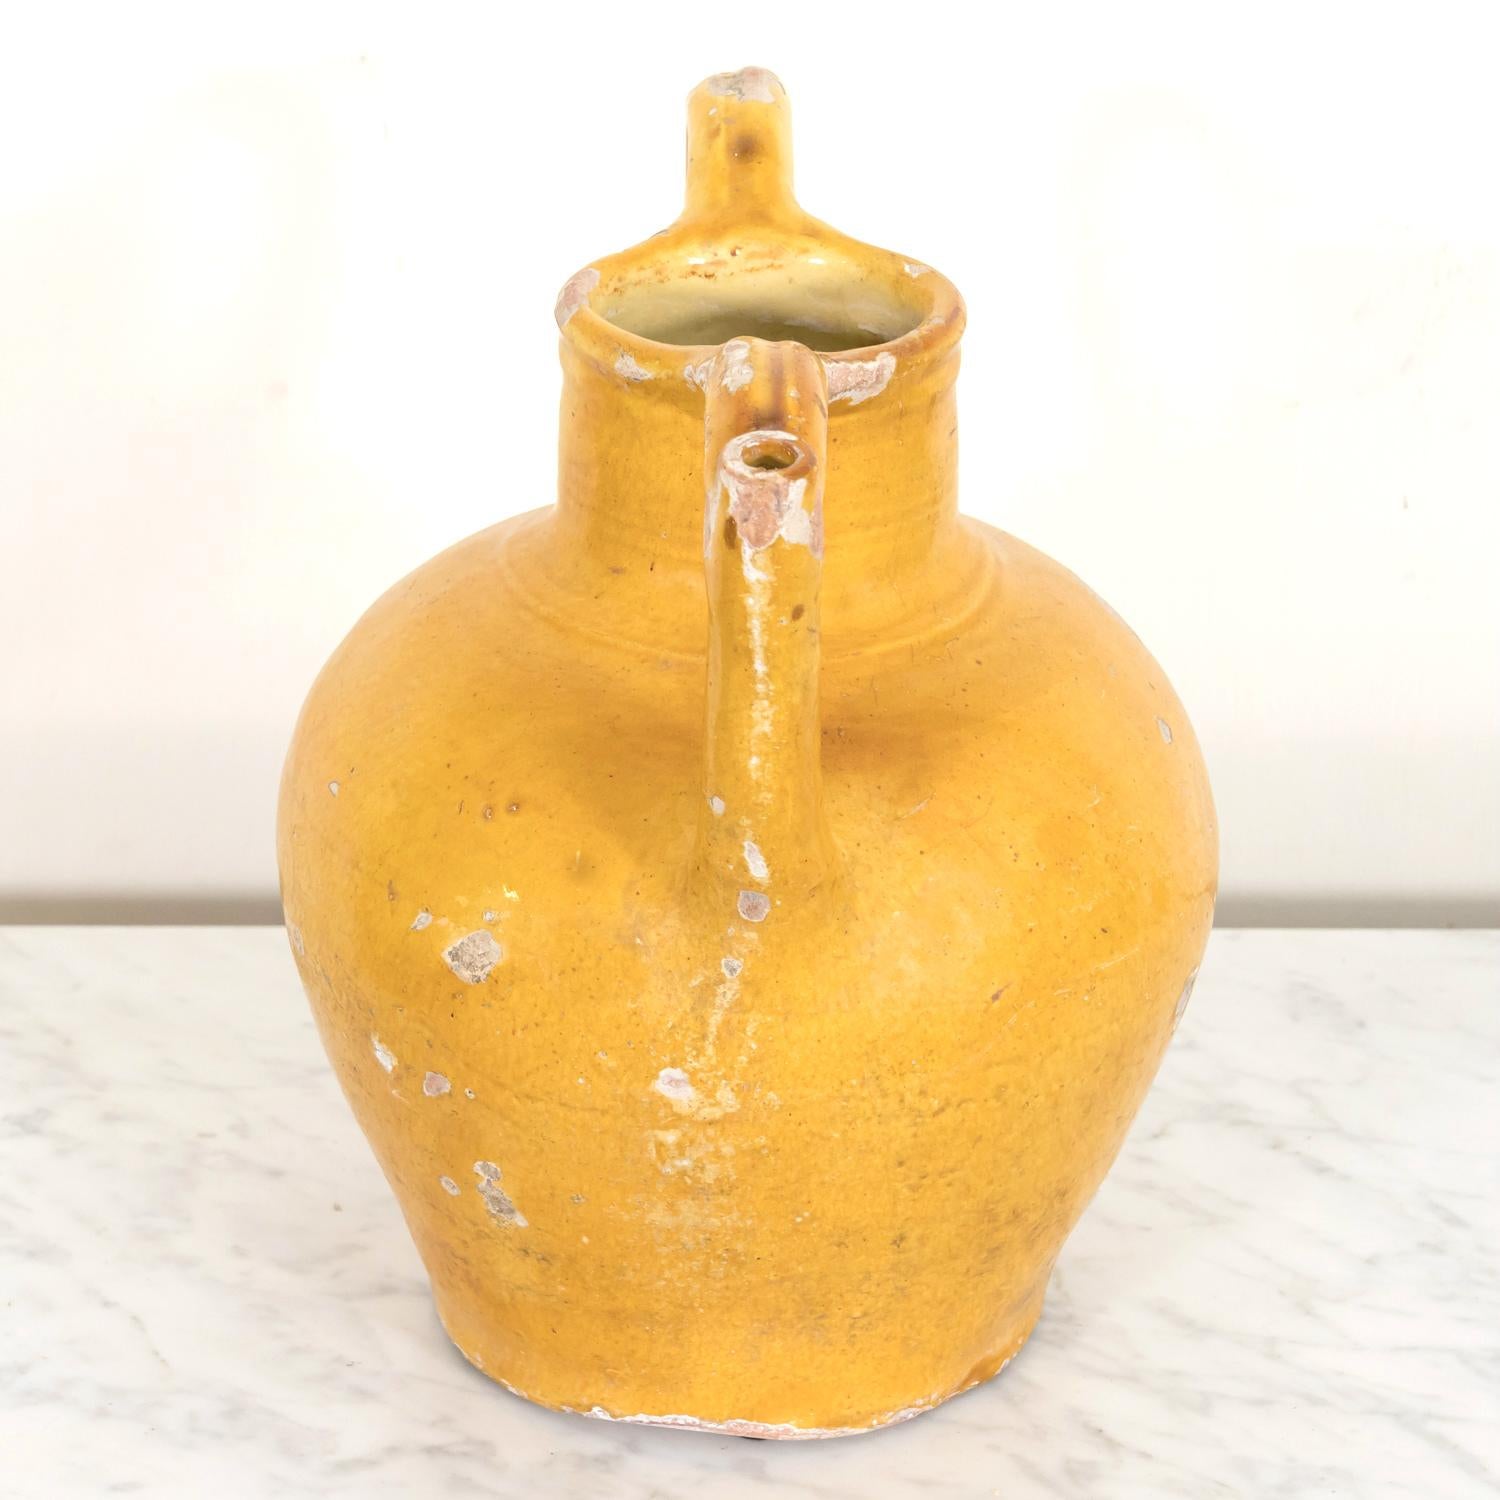 Earthenware 19th Century Antique French Cruche Orjol or Water Jug with Mustard Yellow Glaze For Sale